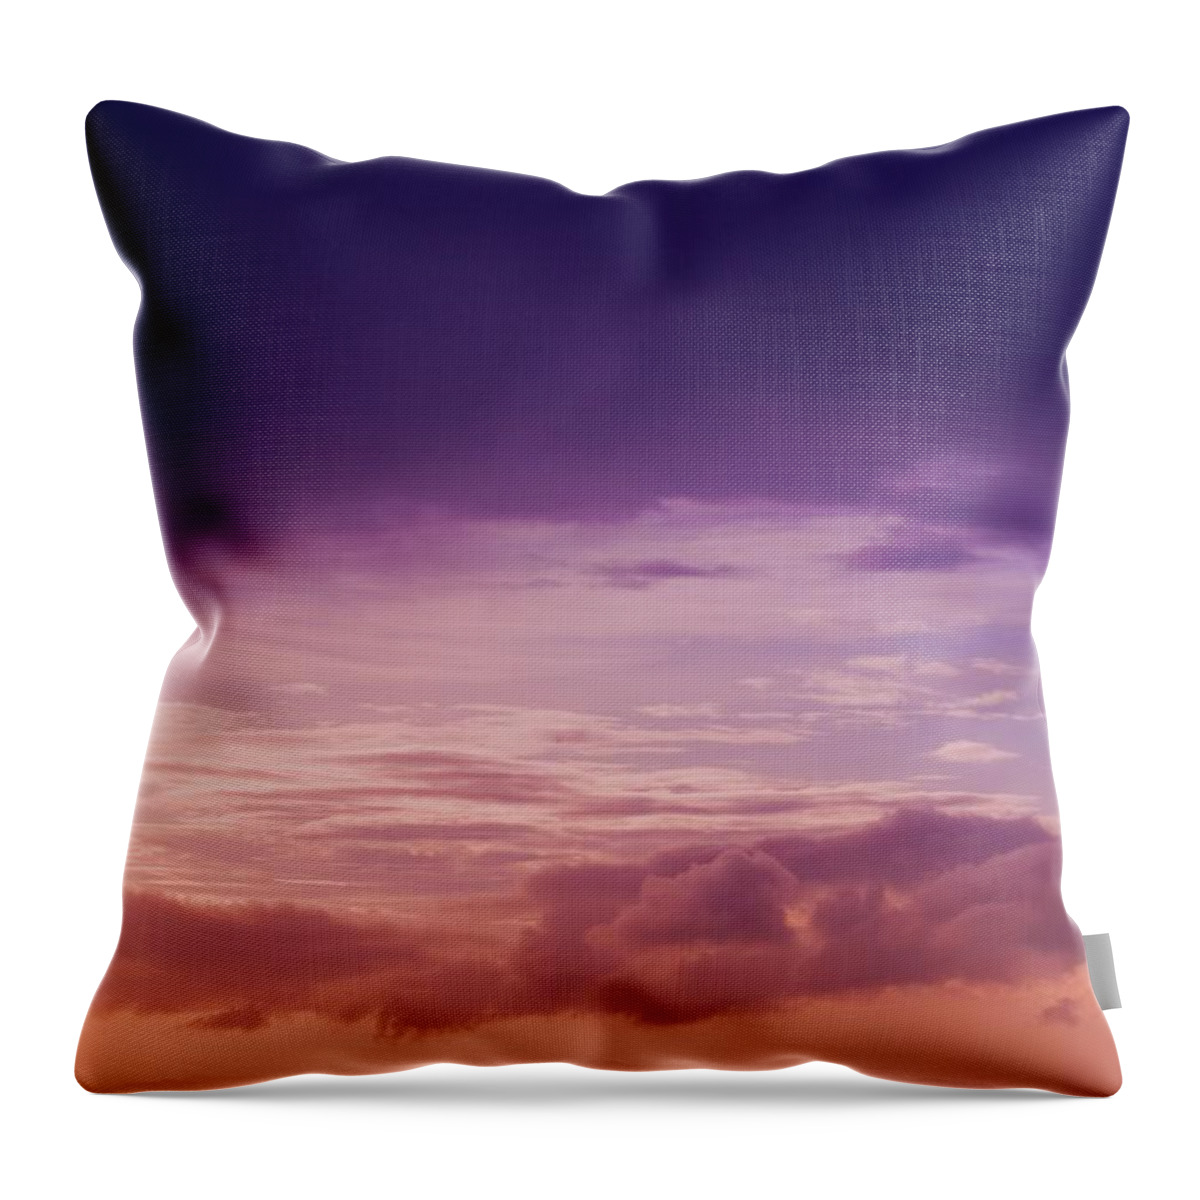 Blue Ridge Mountains Throw Pillow featuring the photograph Almost Heaven by Melissa Southern